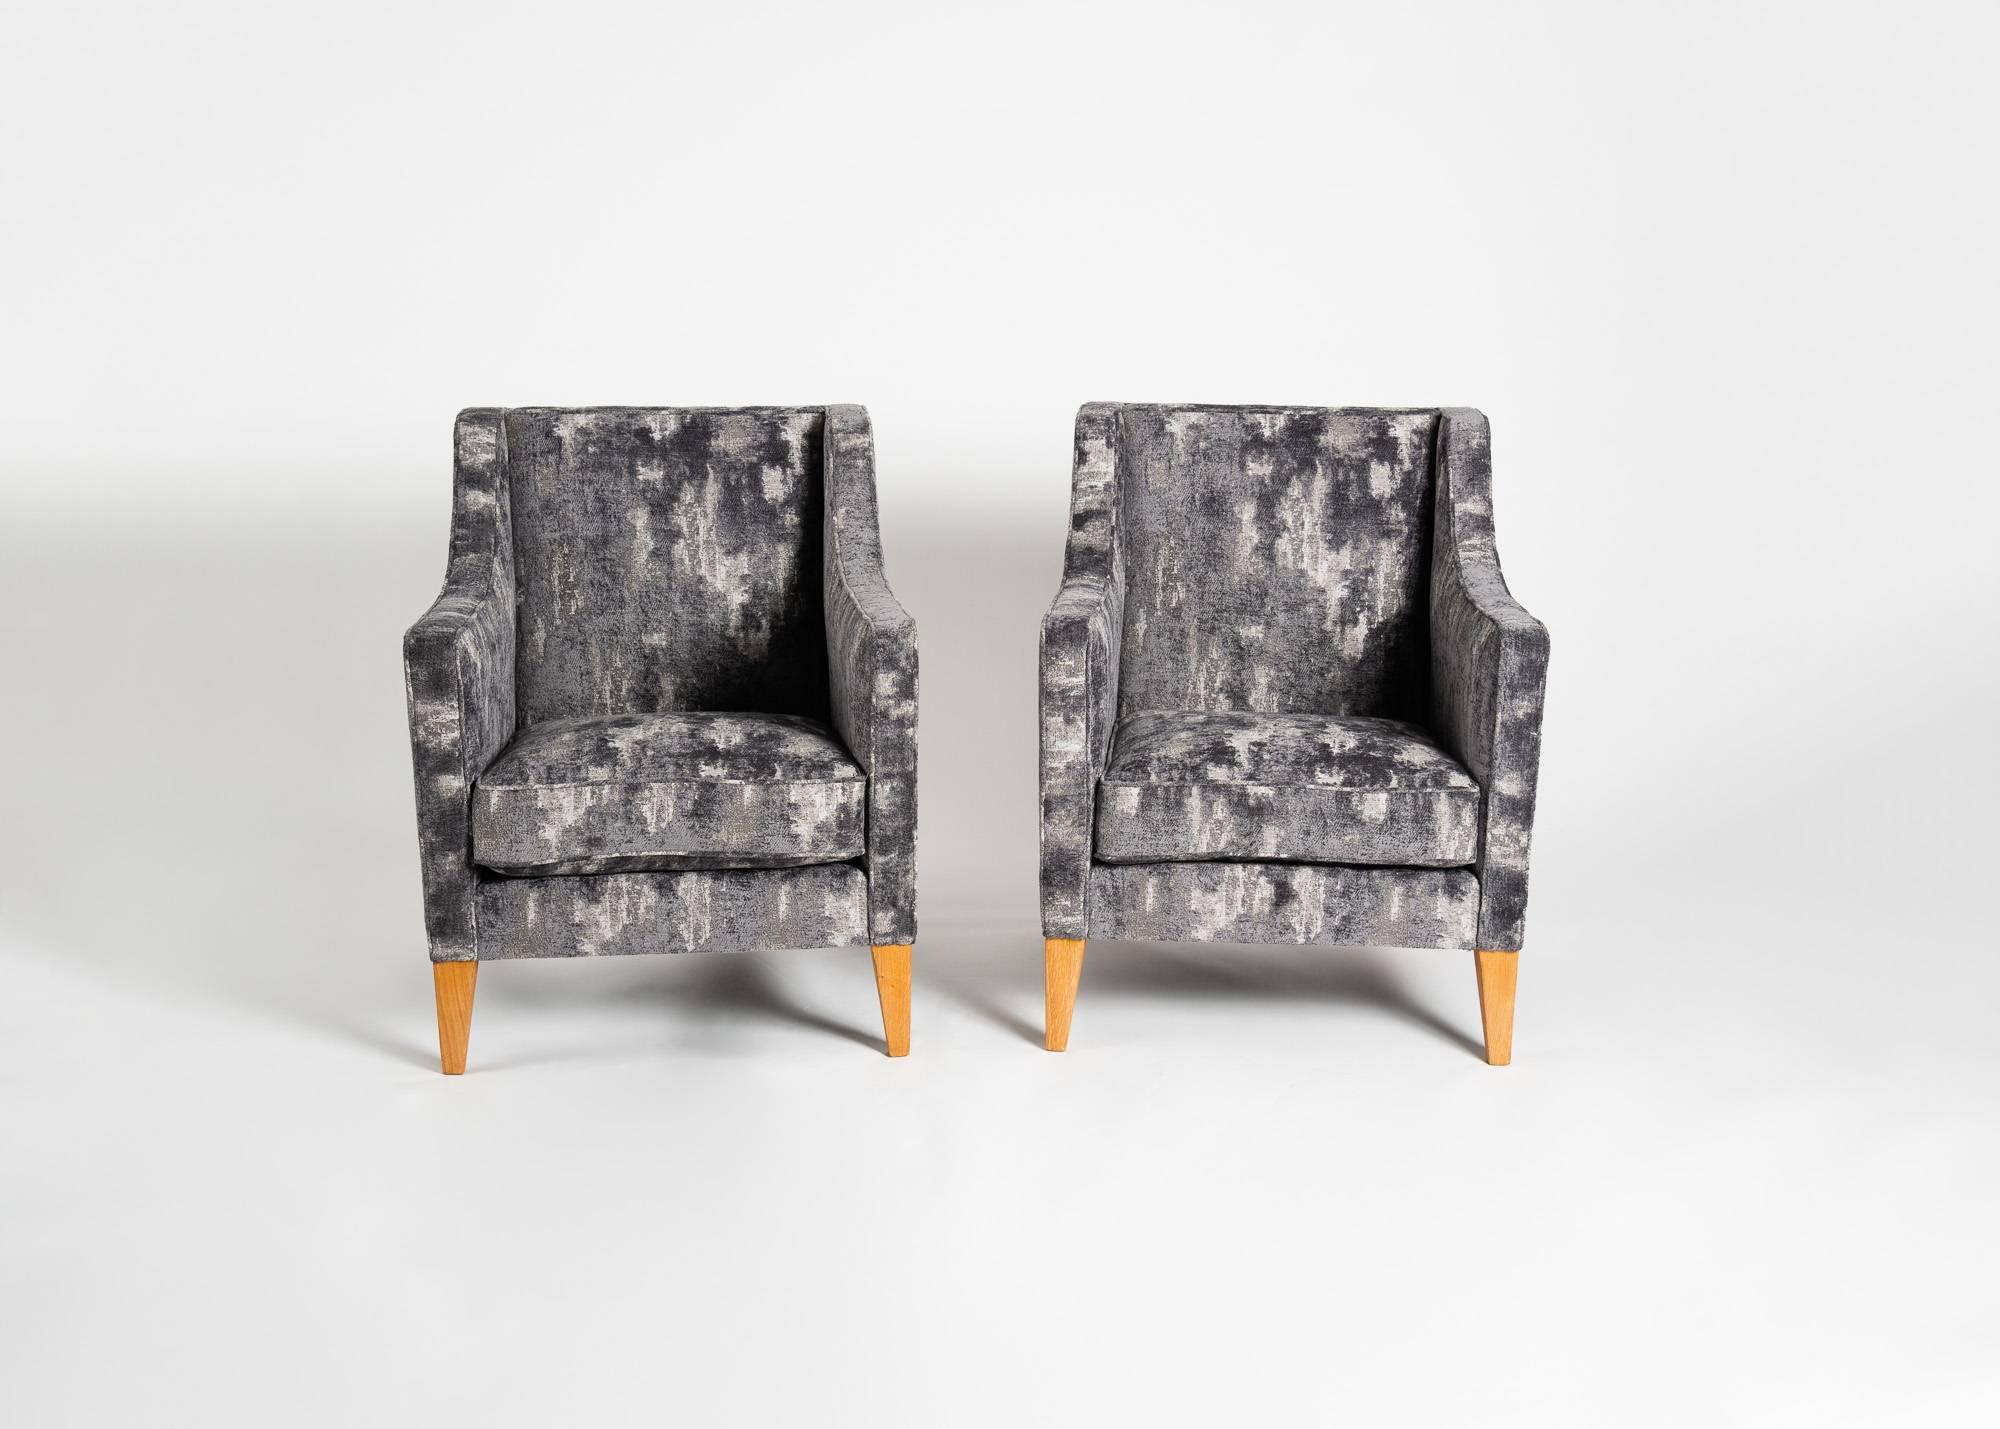 A work typical of the French midcentury, this pair of armchairs by the master Jacques Quinet exhibit identifiable elements of his style, the squared edges, gently tapered legs, and geometric sensibility.